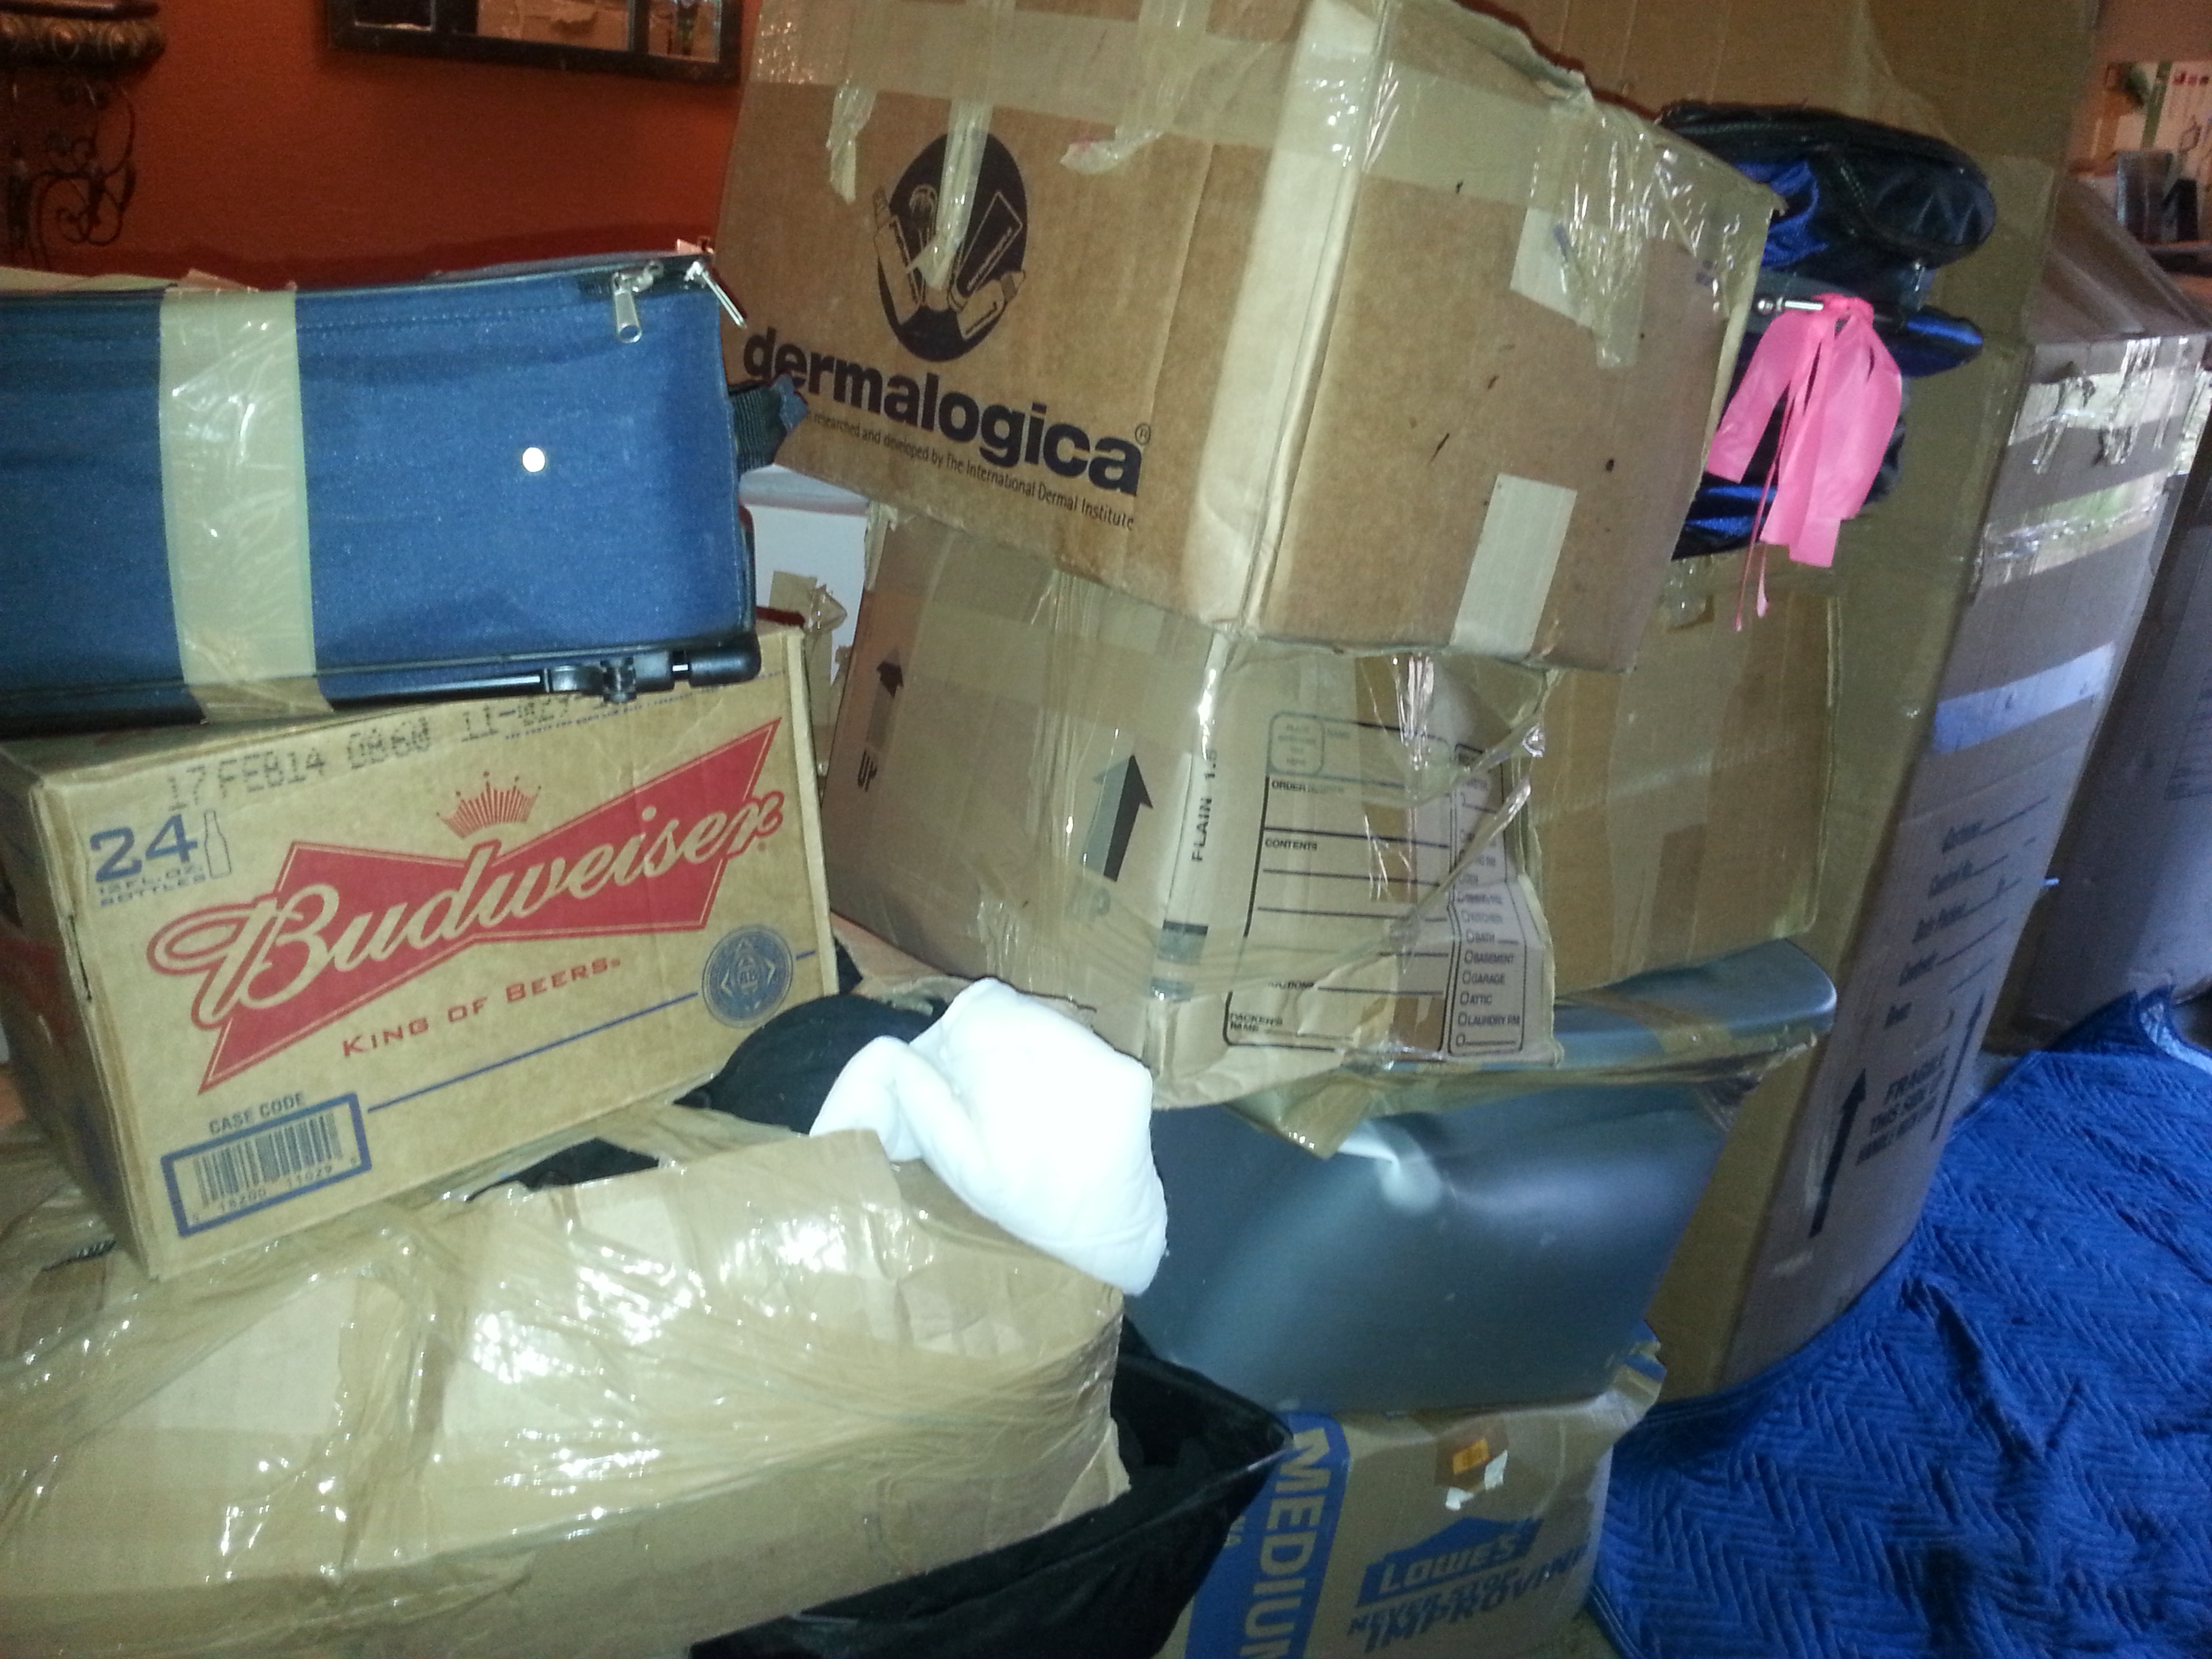 How the movers stacked them in the house